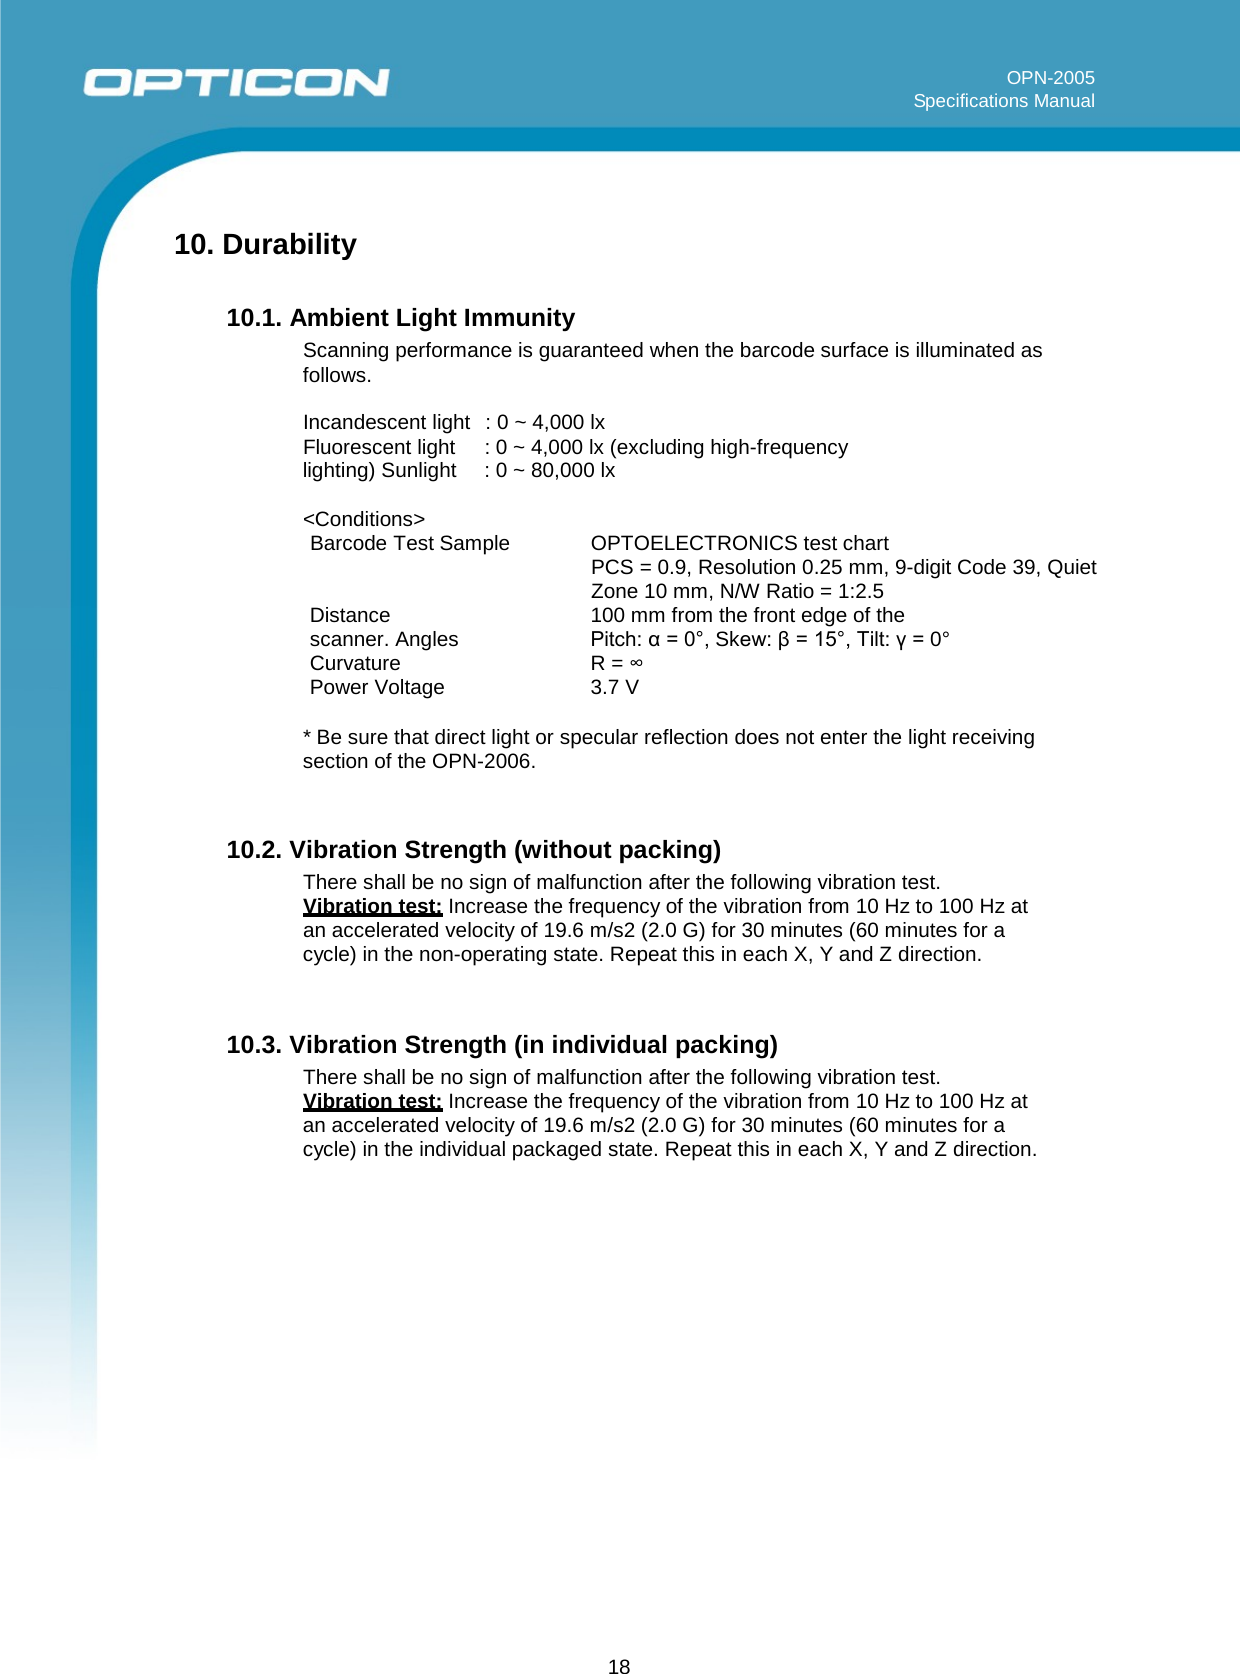 18   OPN-2005 Specifications Manual      10. Durability  10.1. Ambient Light Immunity Scanning performance is guaranteed when the barcode surface is illuminated as follows.  Incandescent light  : 0 ~ 4,000 lx Fluorescent light : 0 ~ 4,000 lx (excluding high-frequency lighting) Sunlight : 0 ~ 80,000 lx  &lt;Conditions&gt; Barcode Test Sample OPTOELECTRONICS test chart PCS = 0.9, Resolution 0.25 mm, 9-digit Code 39, Quiet Zone 10 mm, N/W Ratio = 1:2.5 Distance 100 mm from the front edge of the scanner. Angles  Pitch: α = 0°, Skew: β = 15°, Tilt: γ = 0° Curvature R = ∞ Power Voltage  3.7 V  * Be sure that direct light or specular reflection does not enter the light receiving section of the OPN-2006.   10.2. Vibration Strength (without packing) There shall be no sign of malfunction after the following vibration test. Vibration test: Increase the frequency of the vibration from 10 Hz to 100 Hz at an accelerated velocity of 19.6 m/s2 (2.0 G) for 30 minutes (60 minutes for a cycle) in the non-operating state. Repeat this in each X, Y and Z direction.   10.3. Vibration Strength (in individual packing) There shall be no sign of malfunction after the following vibration test. Vibration test: Increase the frequency of the vibration from 10 Hz to 100 Hz at an accelerated velocity of 19.6 m/s2 (2.0 G) for 30 minutes (60 minutes for a cycle) in the individual packaged state. Repeat this in each X, Y and Z direction.        